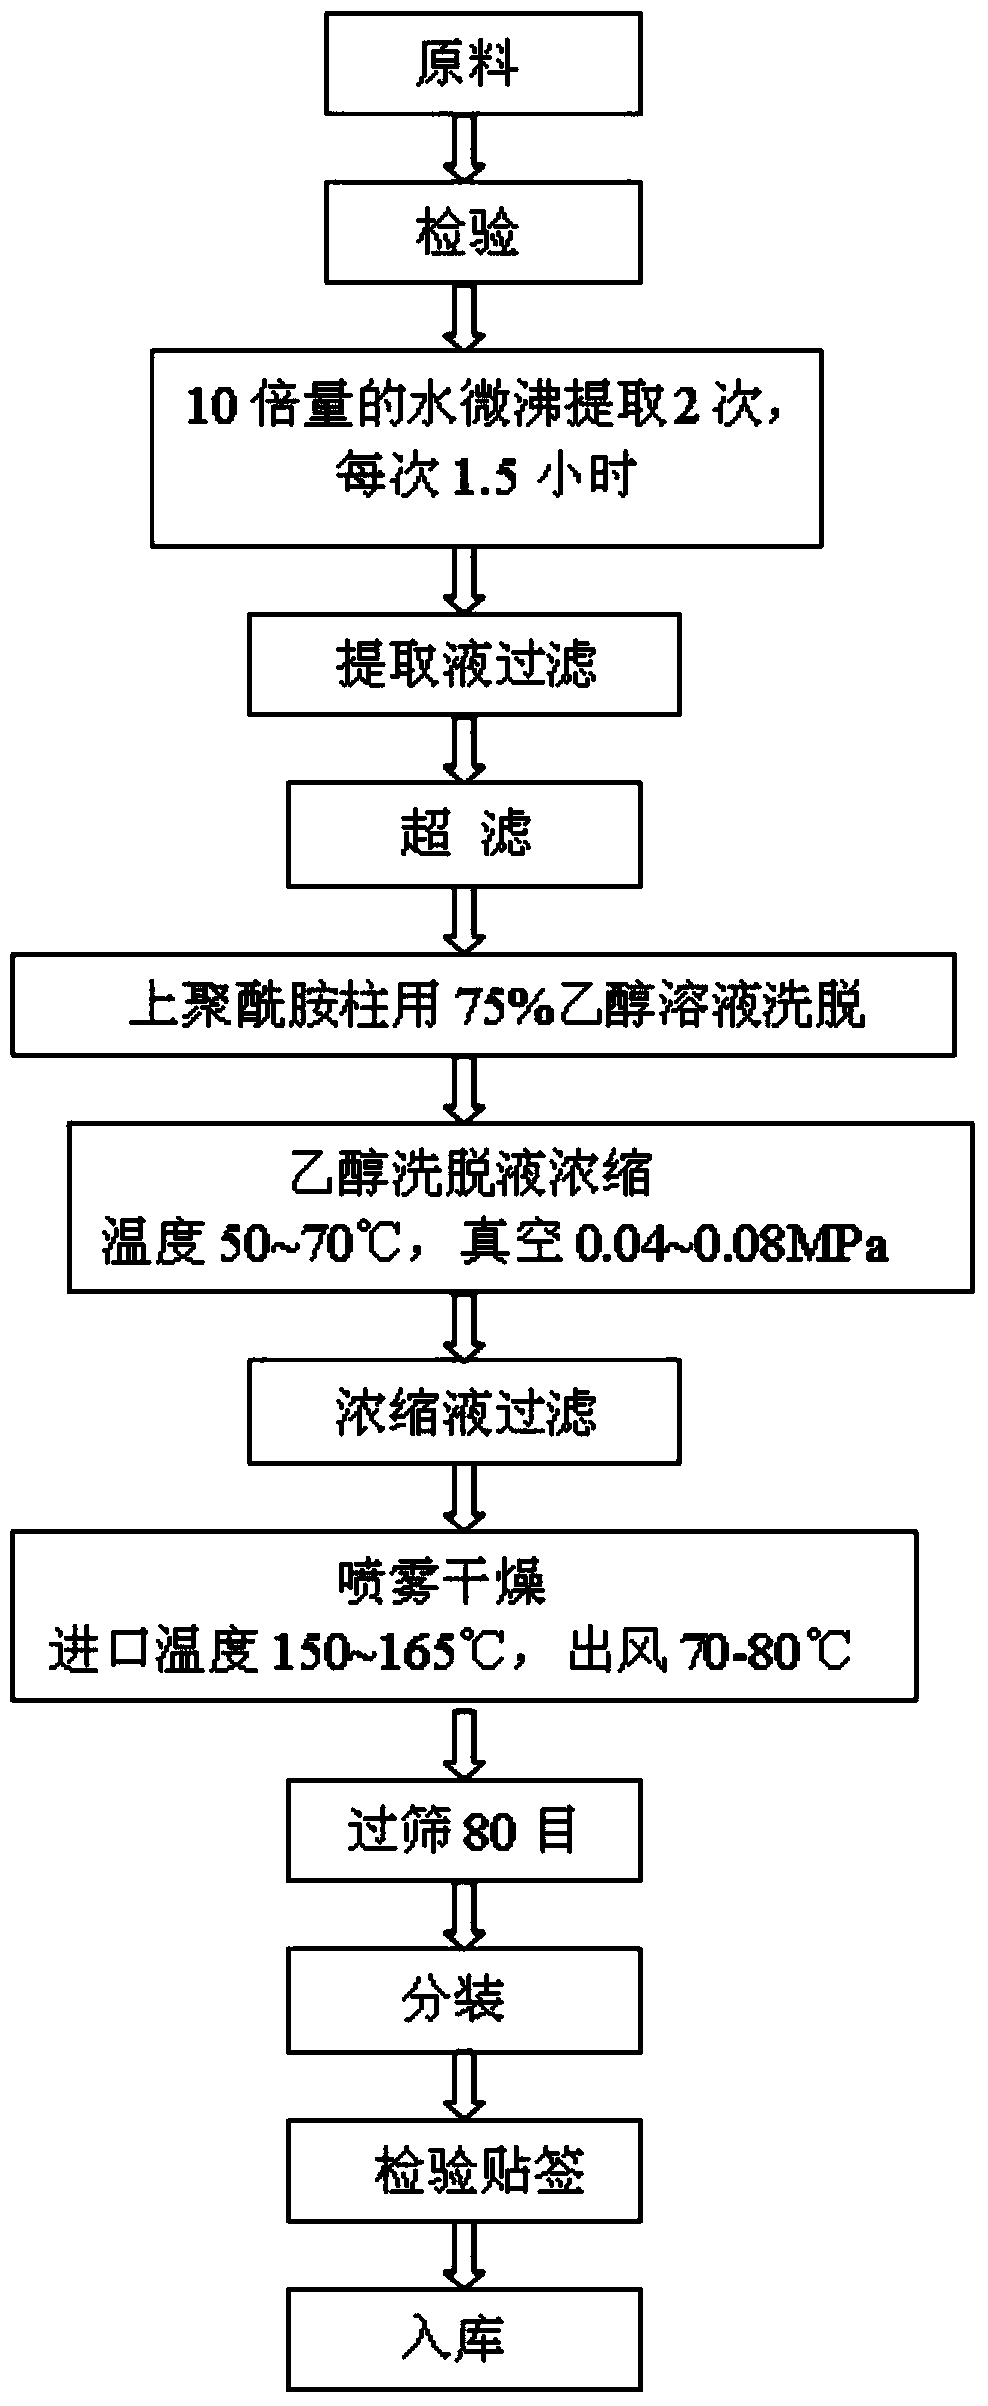 Pharmaceutical composition for removing chloasma